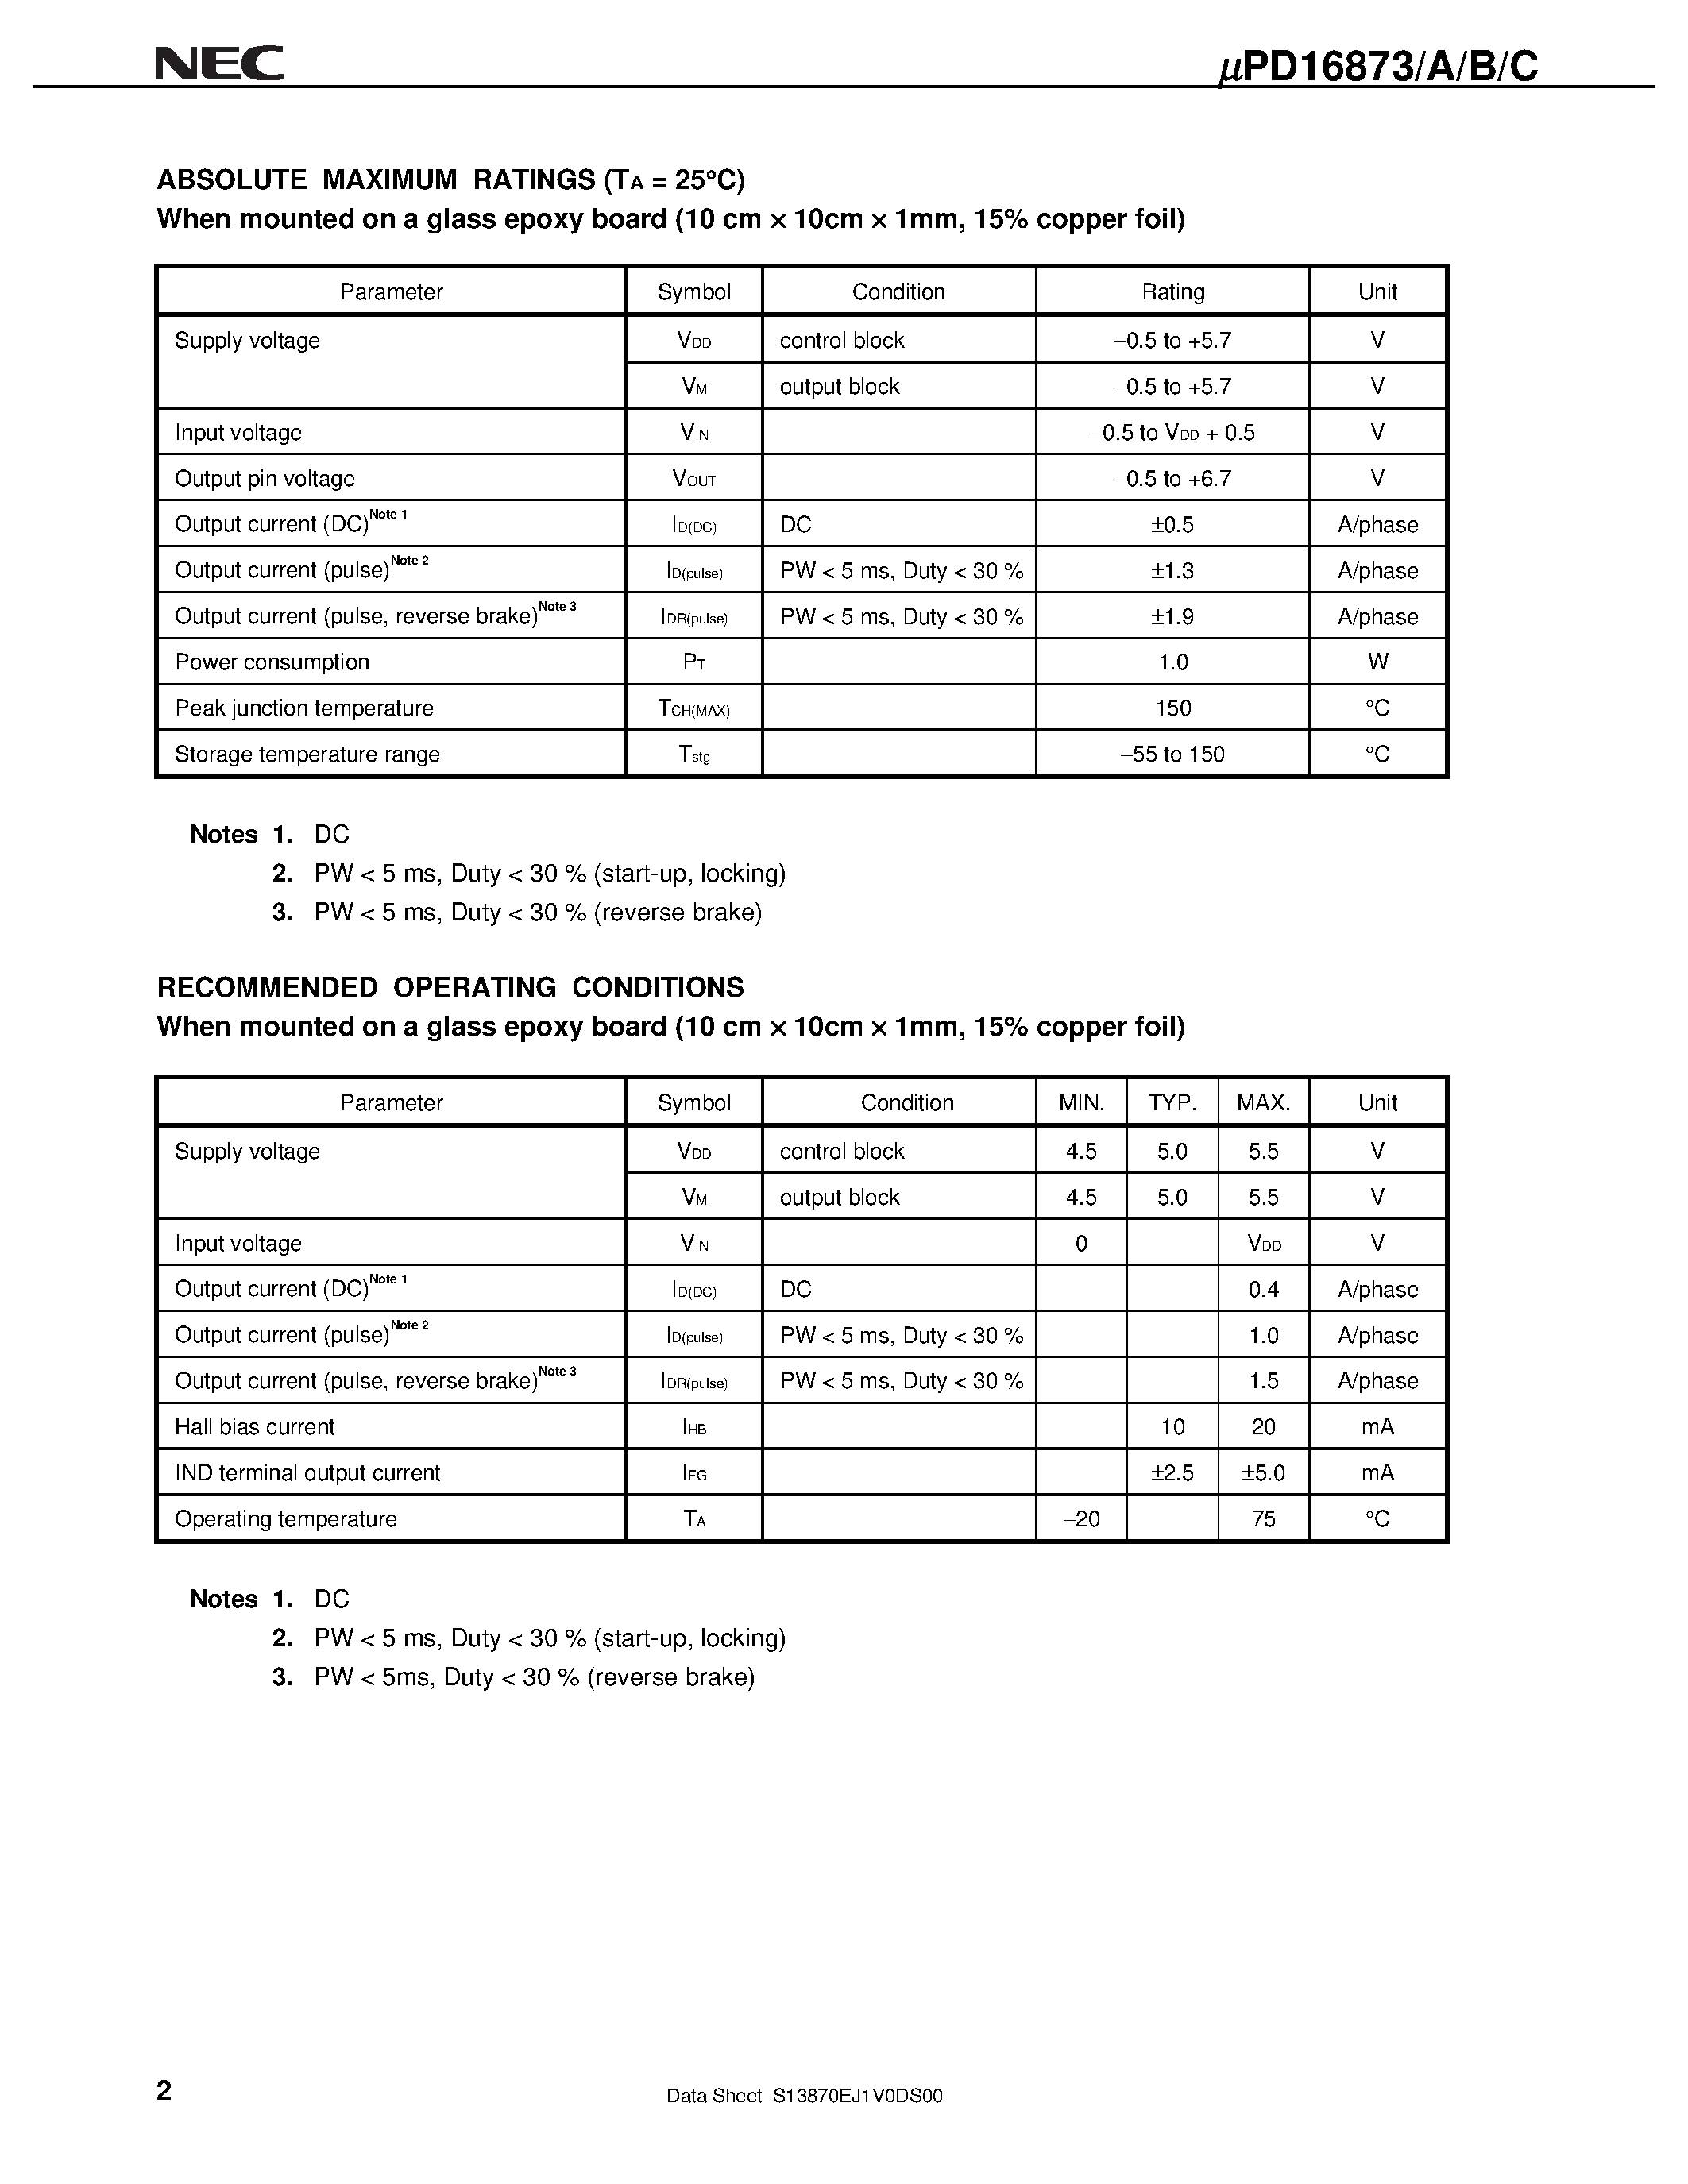 Datasheet UPD16873 - MONOLITHIC 3-ASPECT SPINDLE MOTOR DRIVER page 2